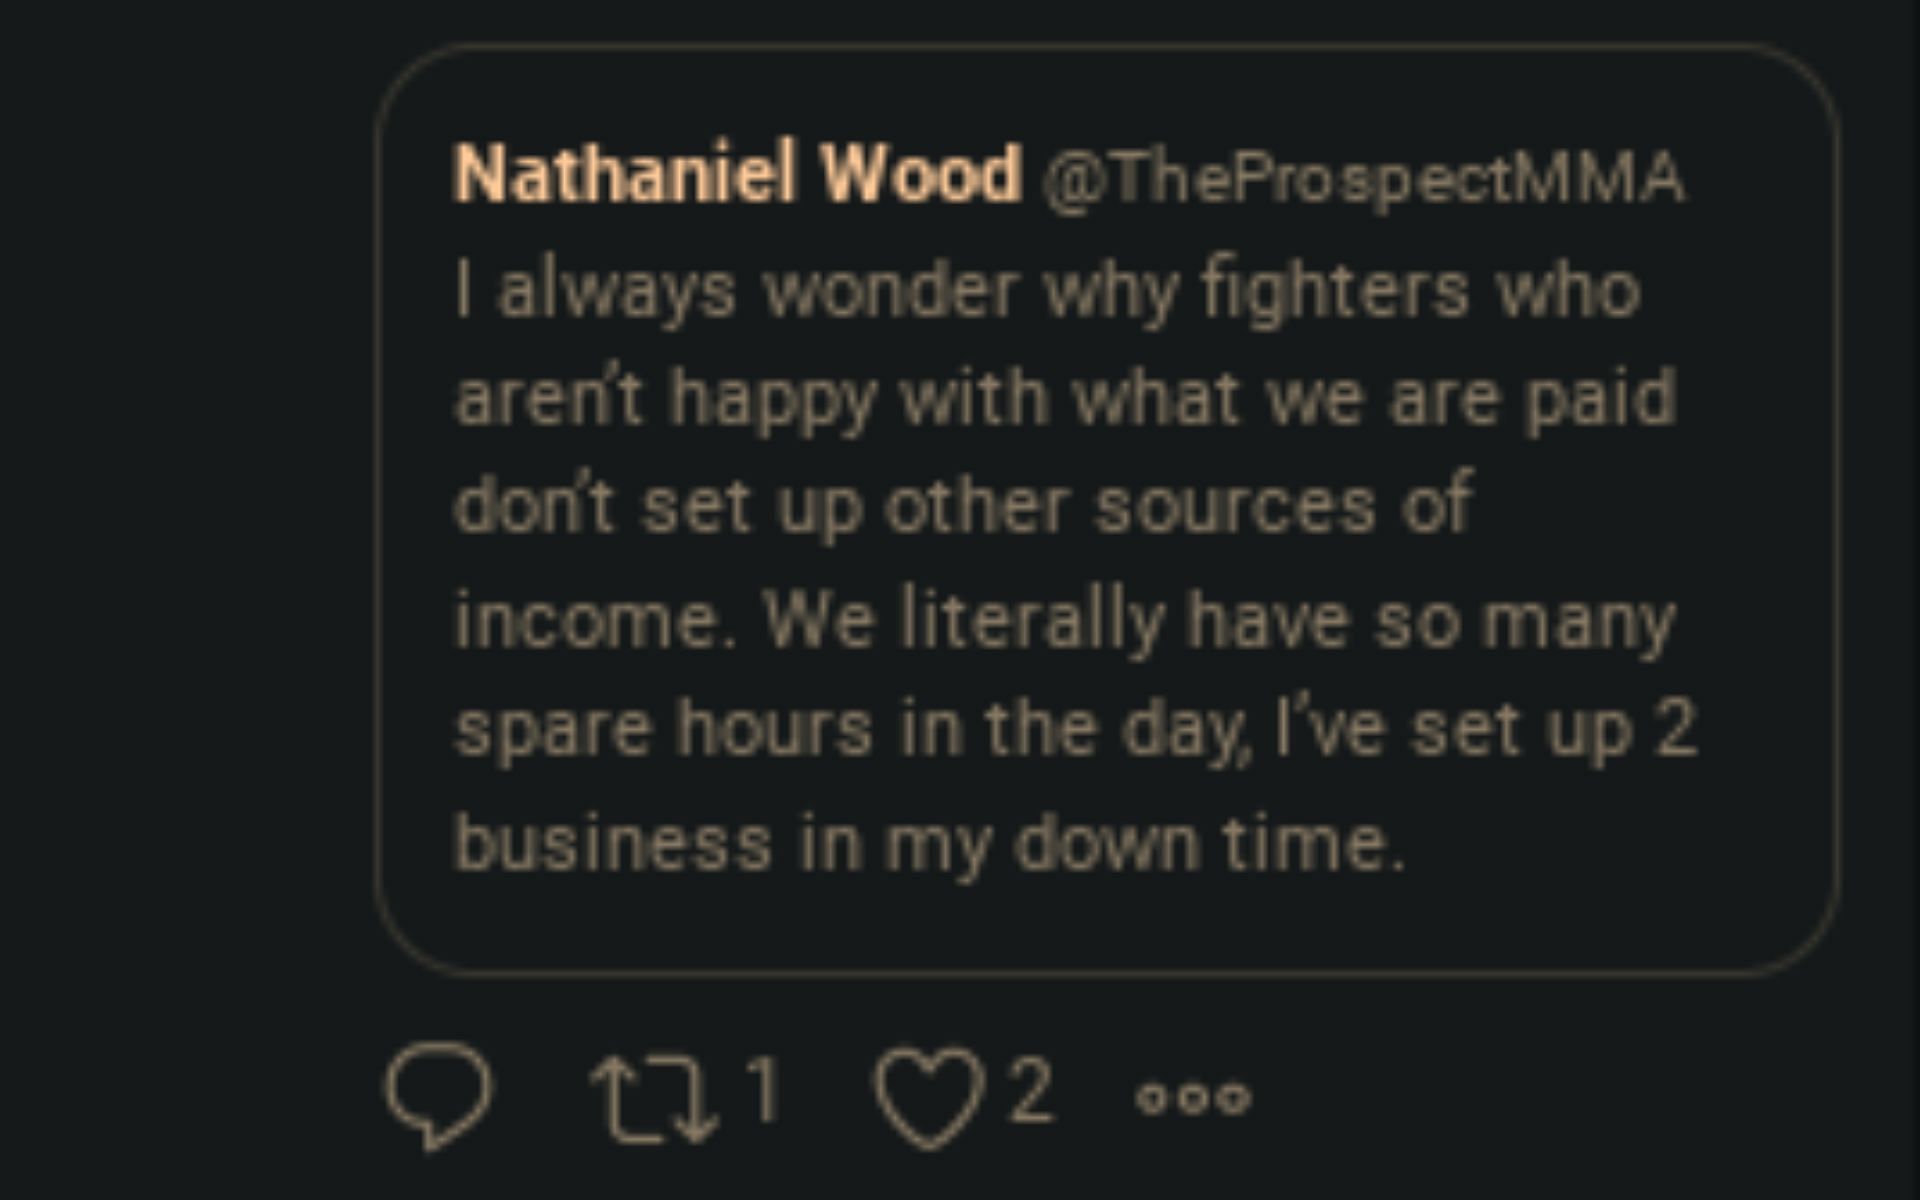 Nathaniel Wood offers business advice to MMA fighters